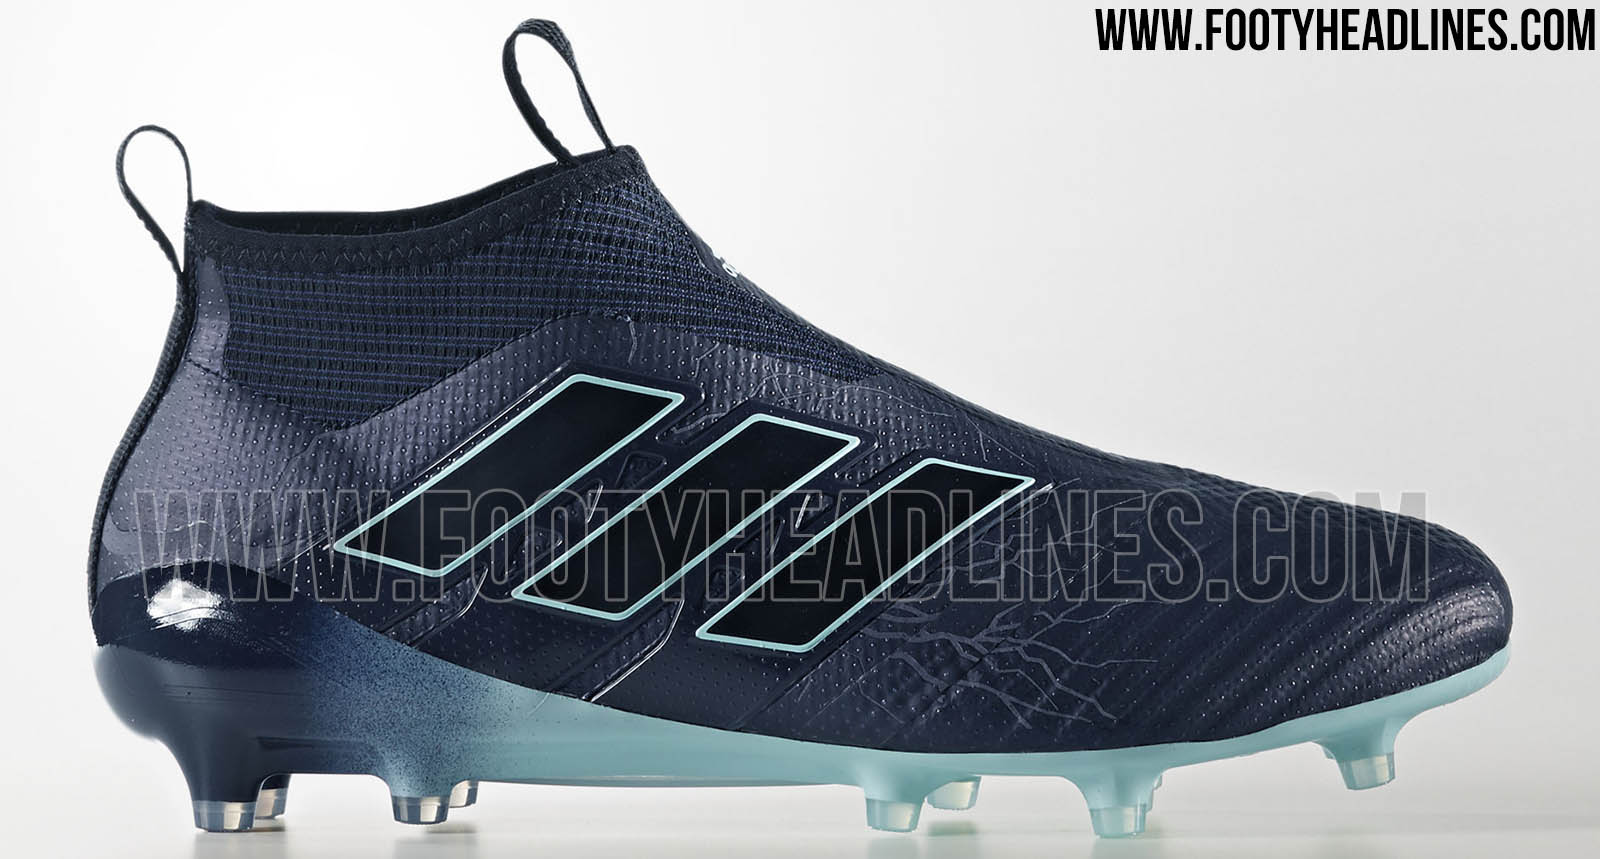 Special-Edition Adidas Ace PureControl 2017-2018 'Thunderstorm' Boots - Footy Headlines